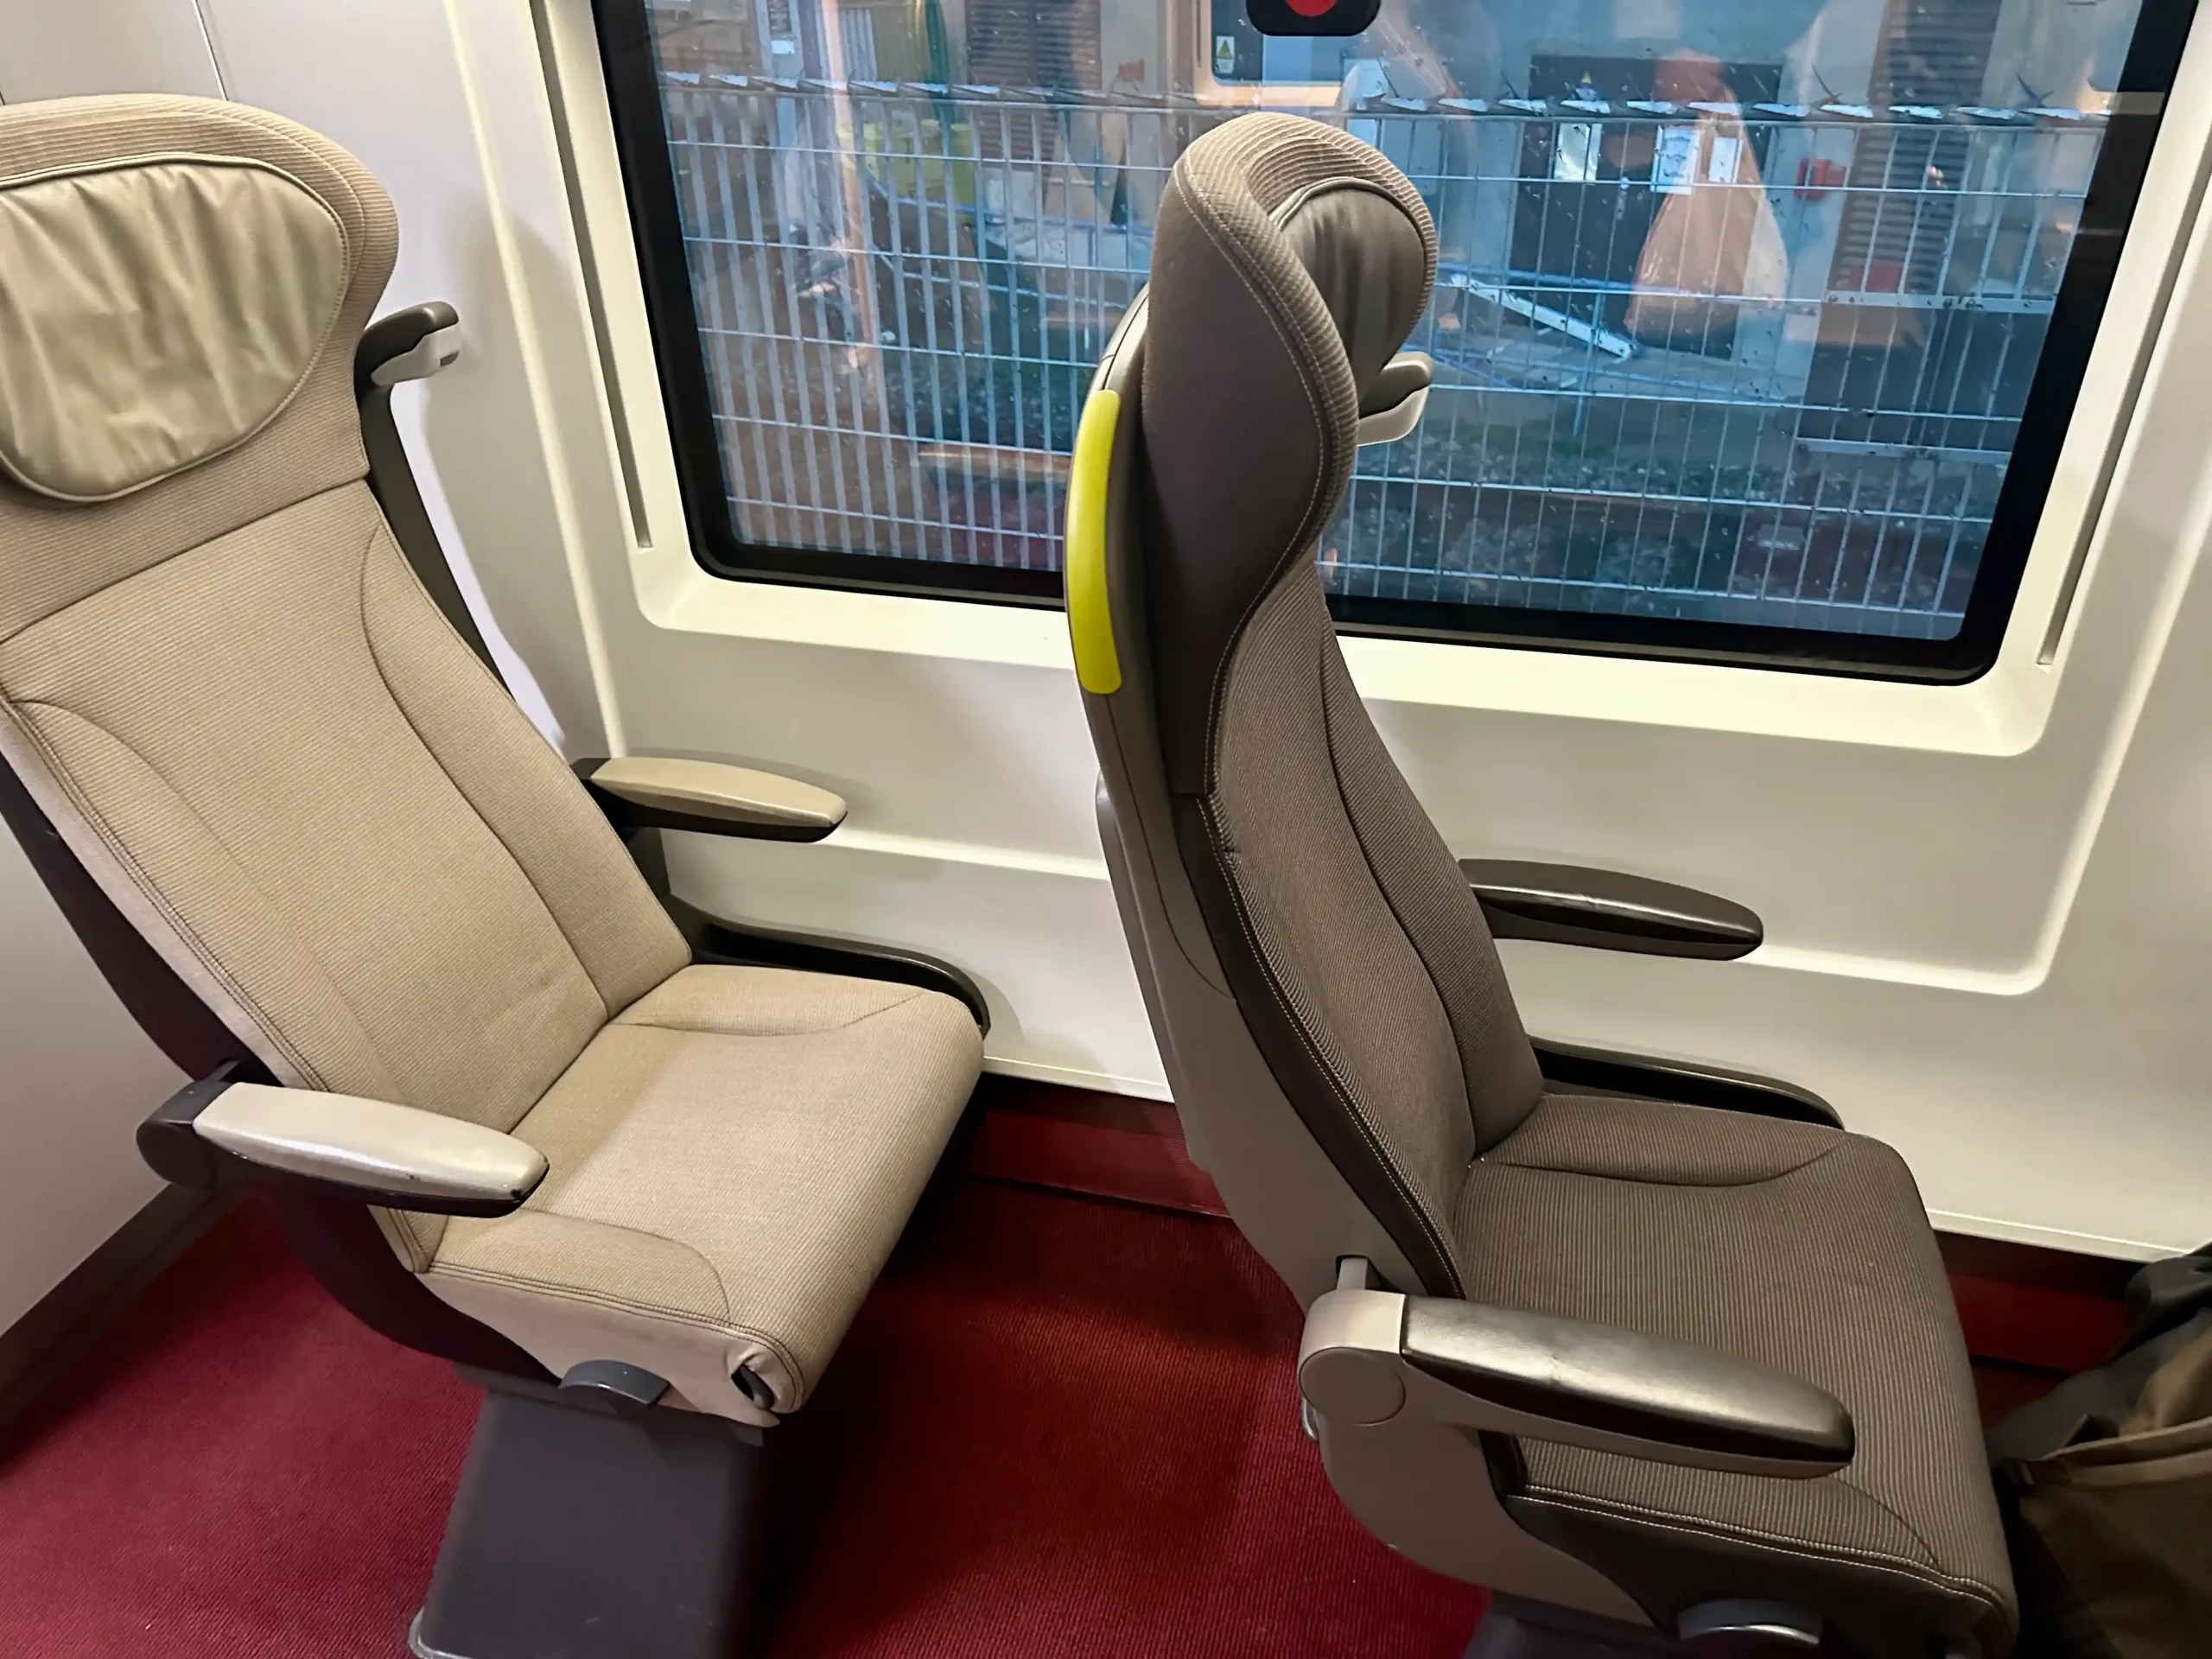 a two seats in a train